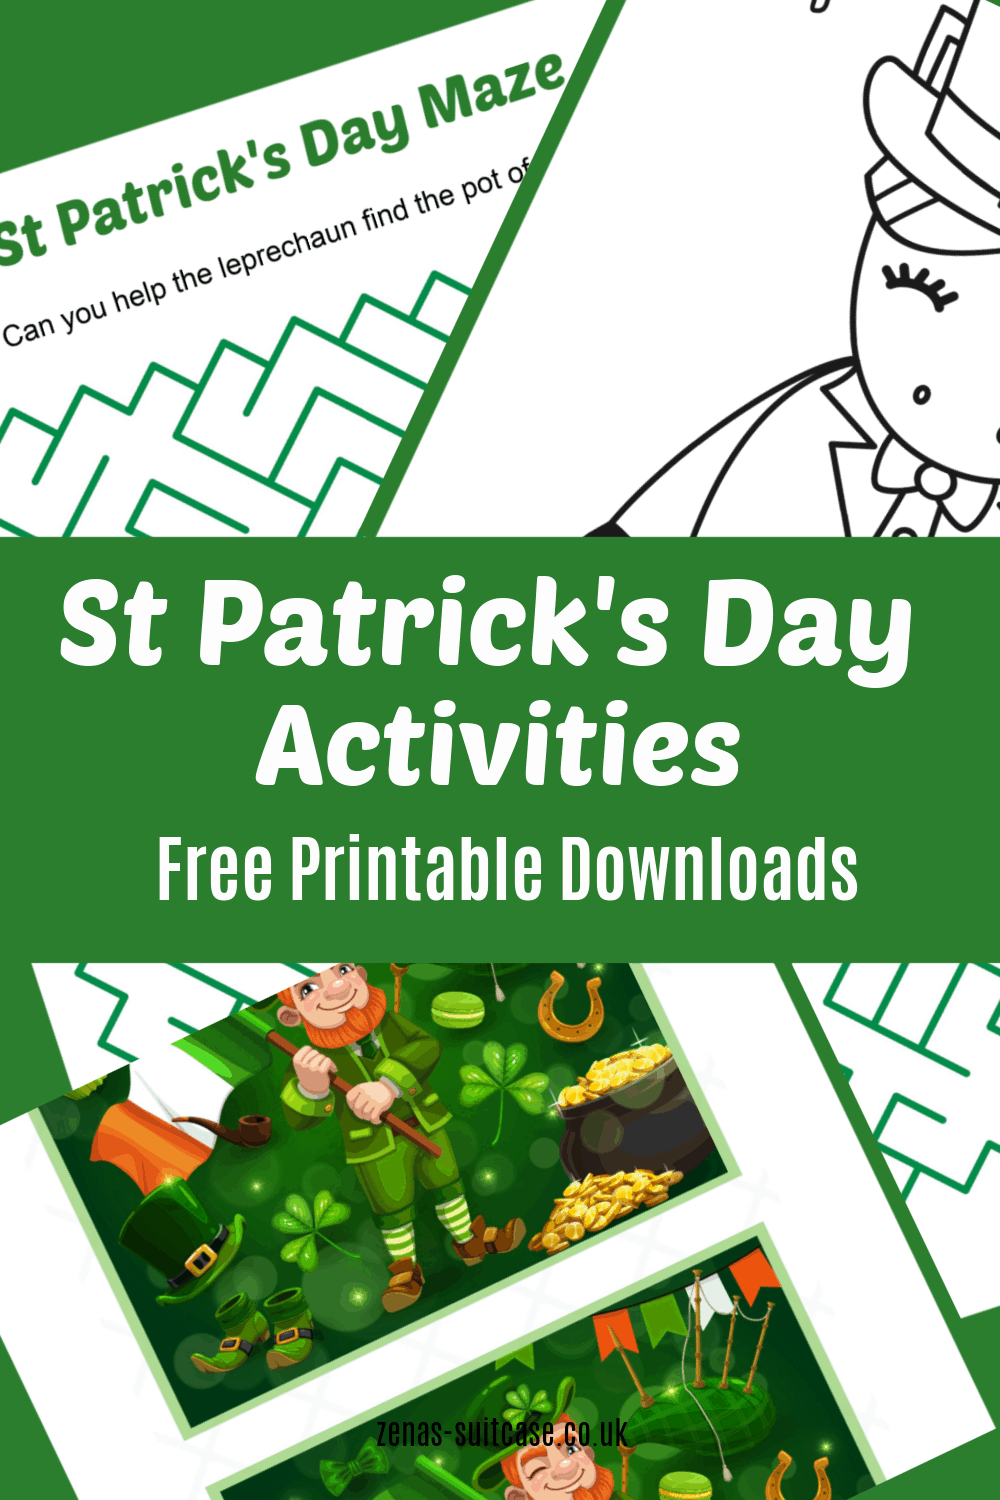 St Patrick's Day colouring and activities for kids - free to download 